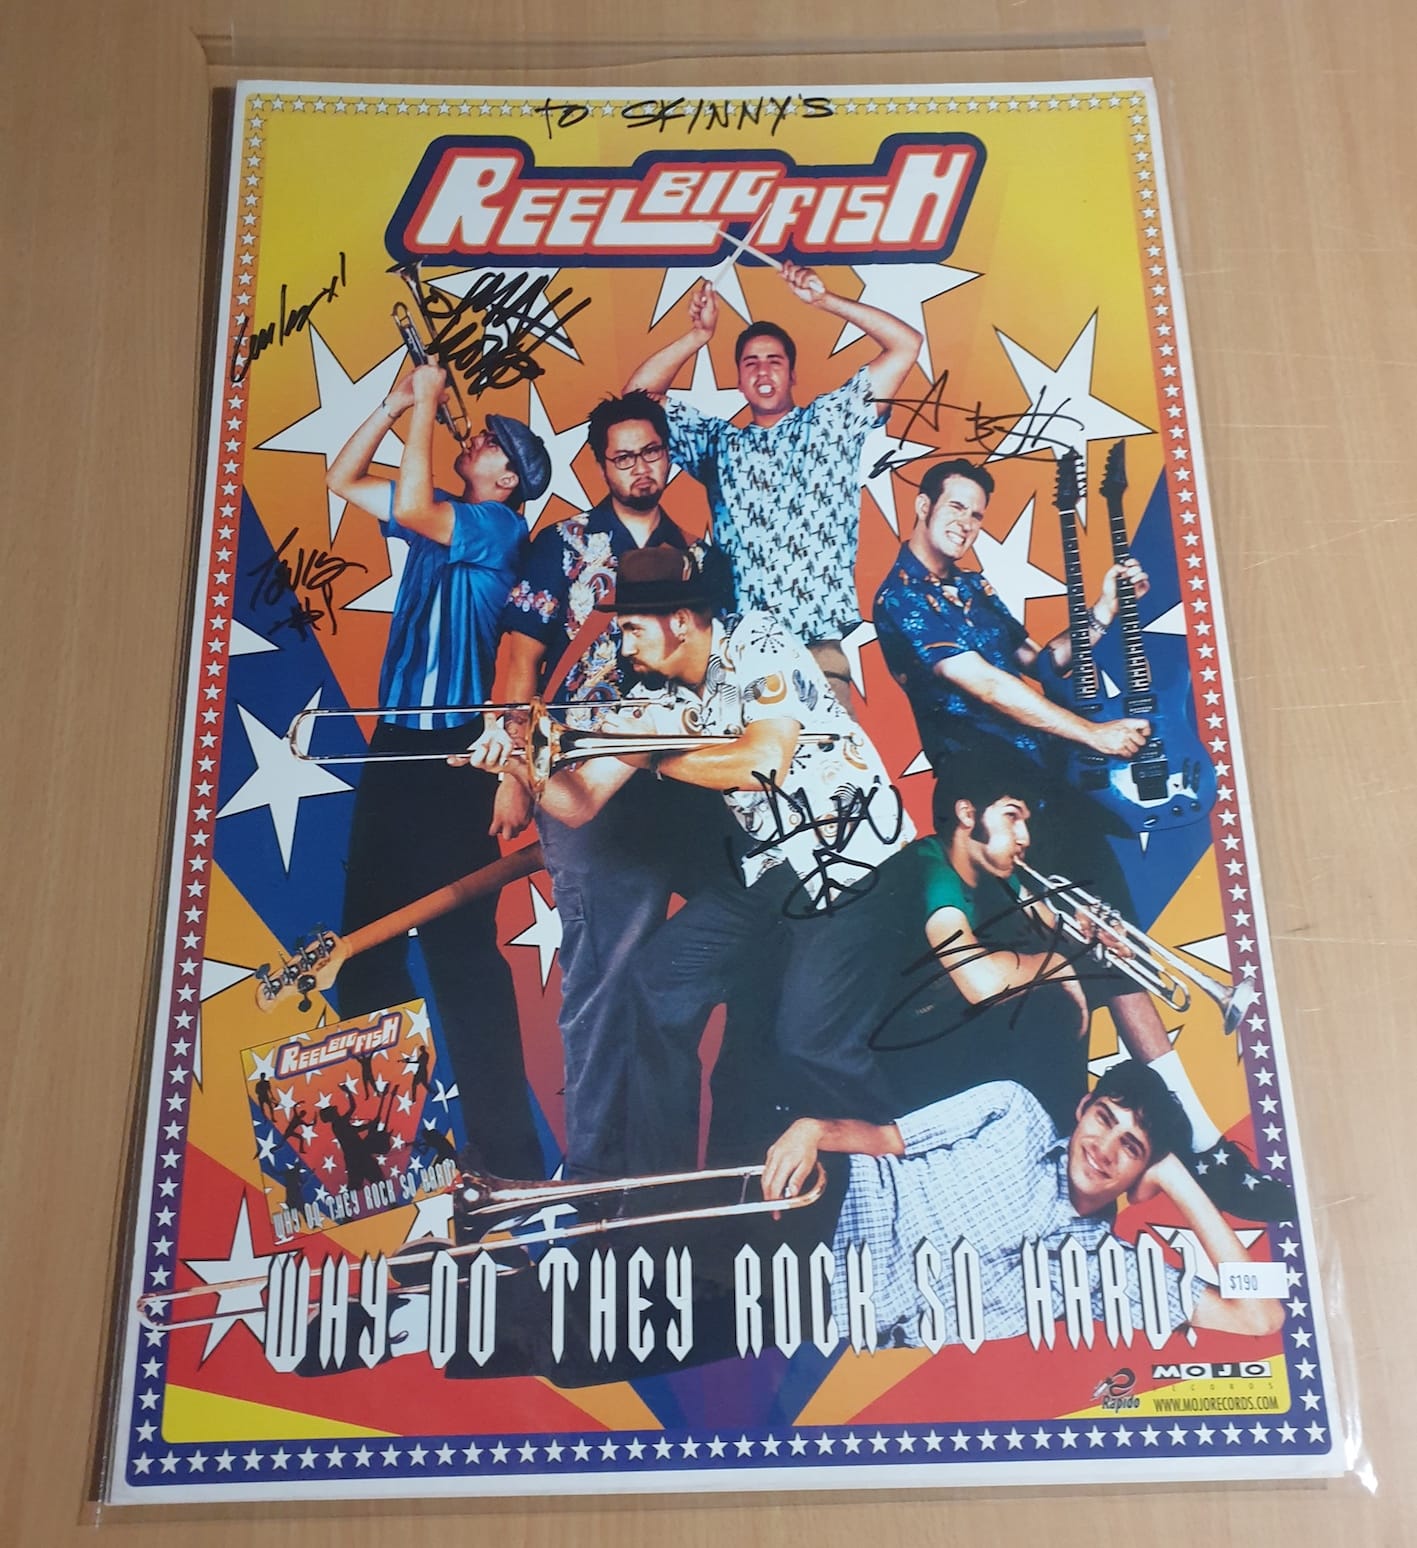 MUSIC PROMO POSTER - REEL BIG FISH WHY DO THEY ROCK SO HARD SIGNED